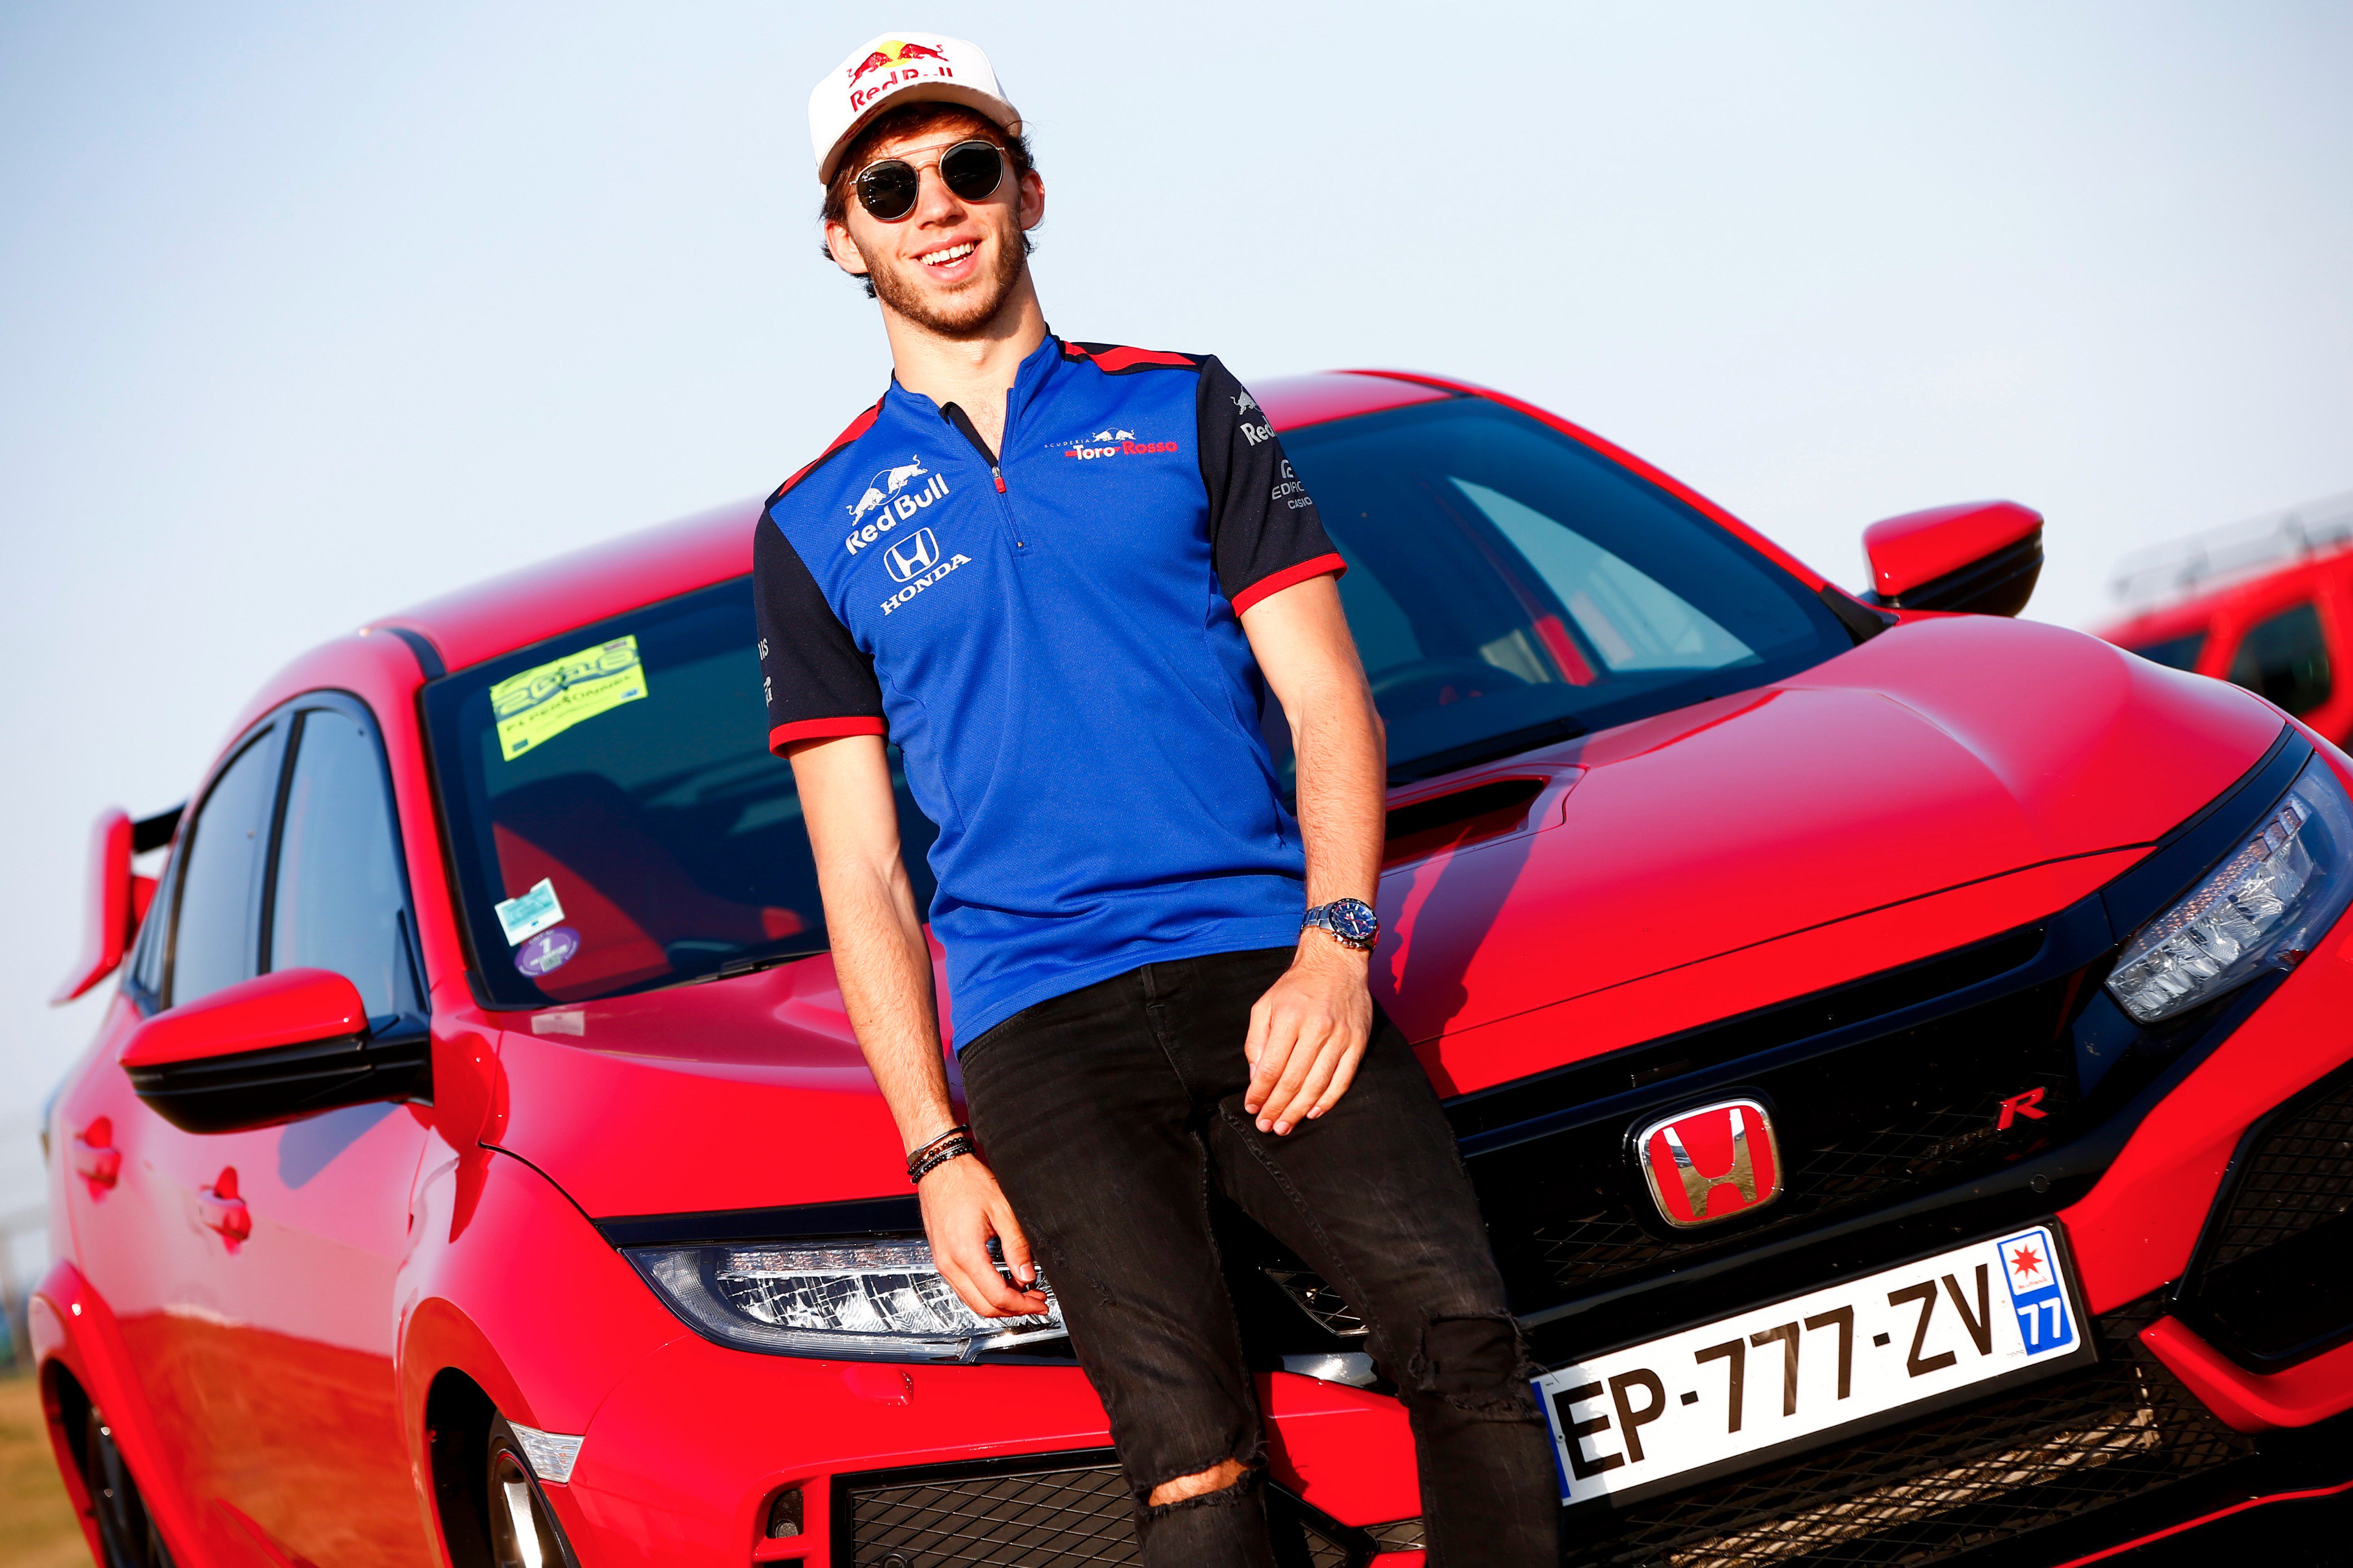 Twitter 上的honda Racing F1 Archive Cruising Into Friday Like It S Matching Civic Type R S For Pierregasly And Brendonhartley At Silverstone This Weekend Hondafamily Honda T Co Hxsmt0uo2p Twitter